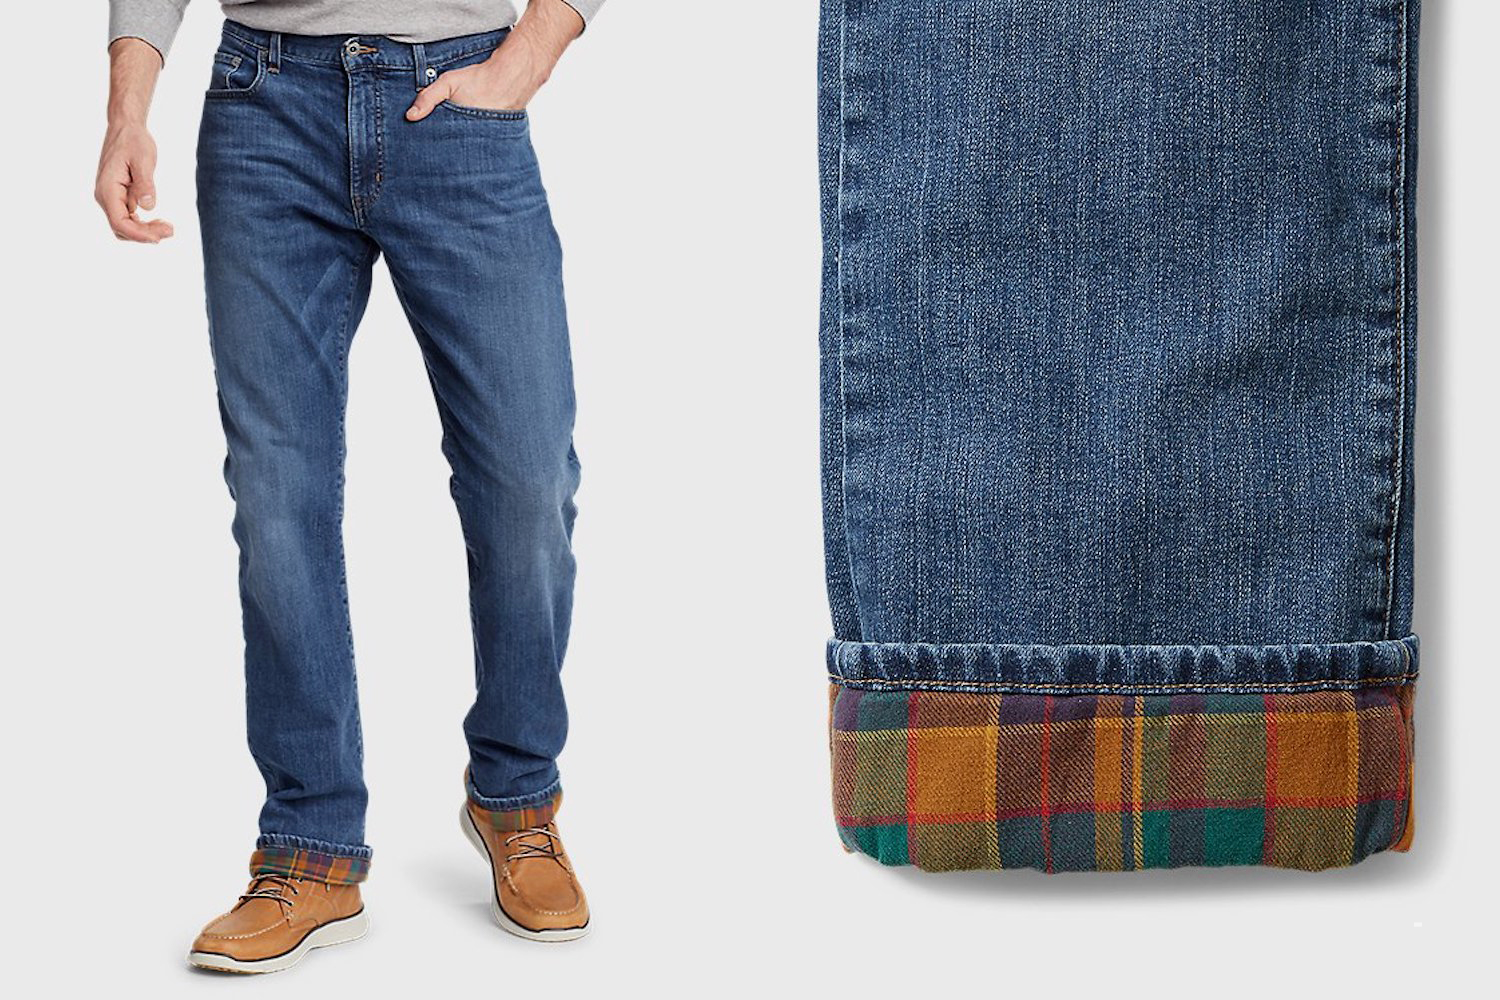 Men's Flannel Lined Jeans – Insulated Gear